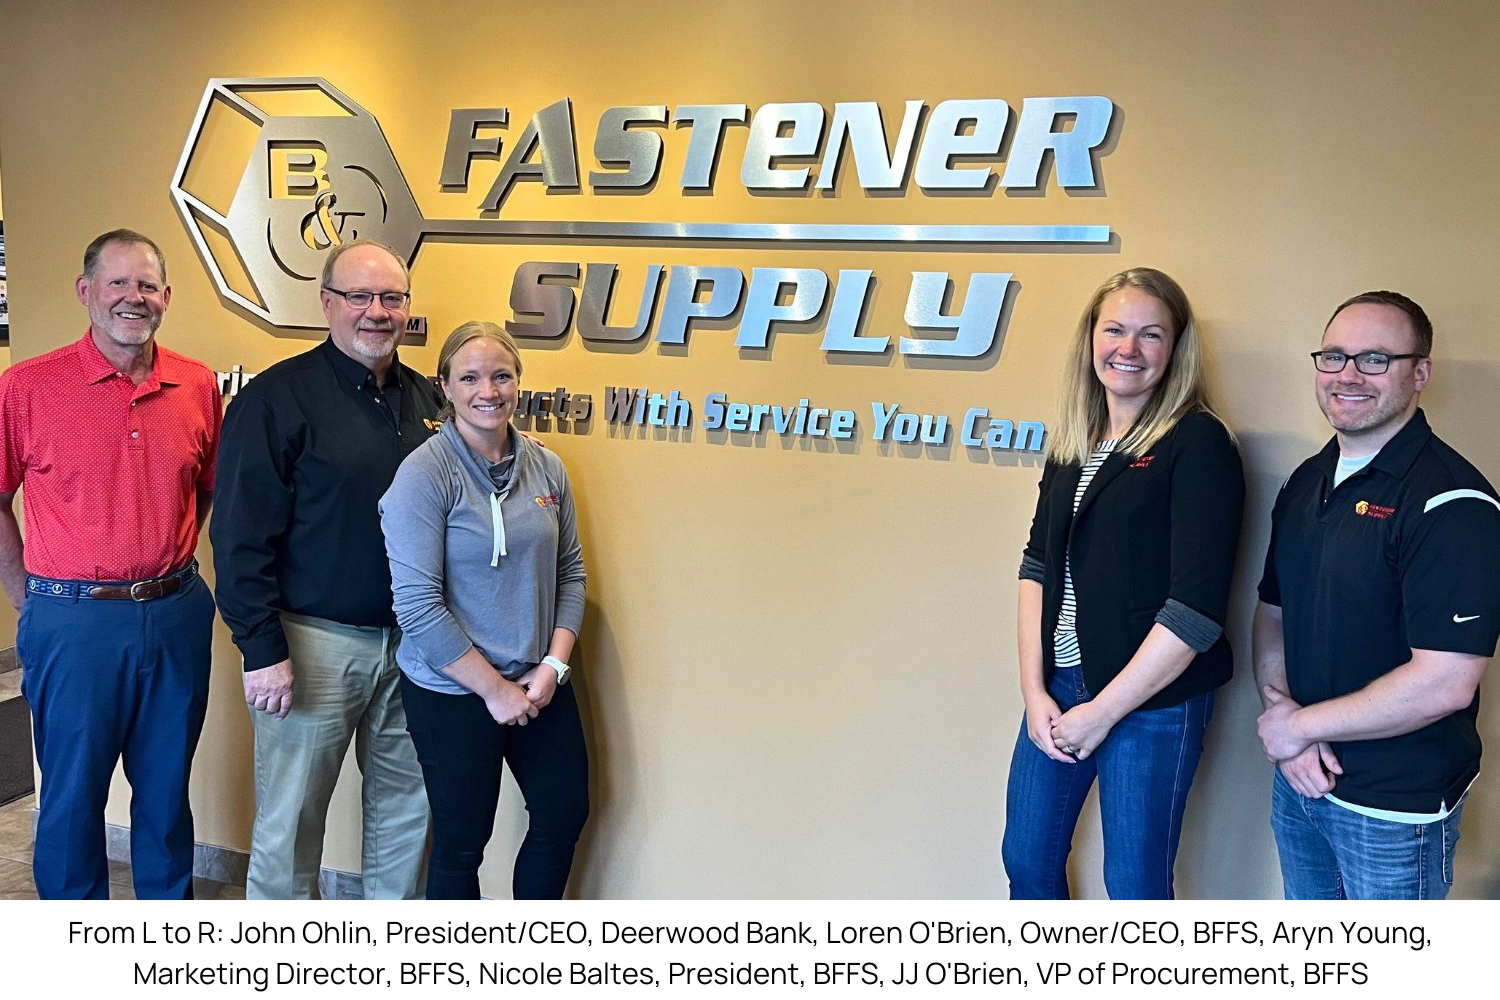 Acquisition Success: B&F Fastener Supply’s Triumph with Help from Deerwood Bank